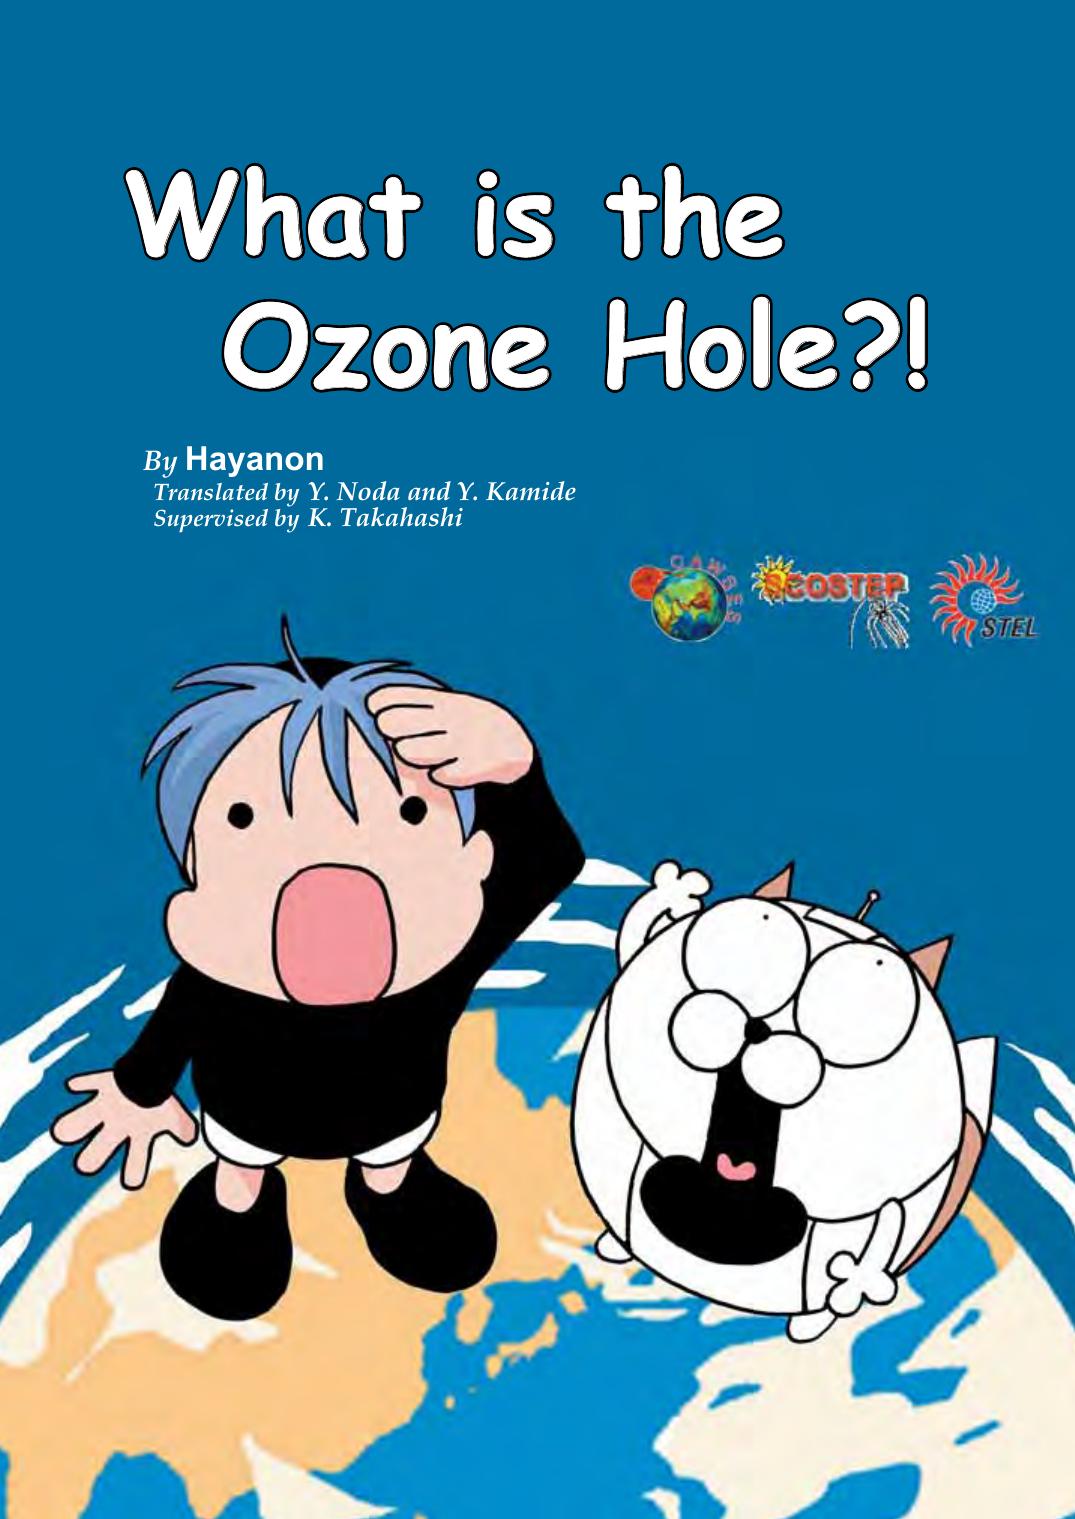 What is the ozone hole?